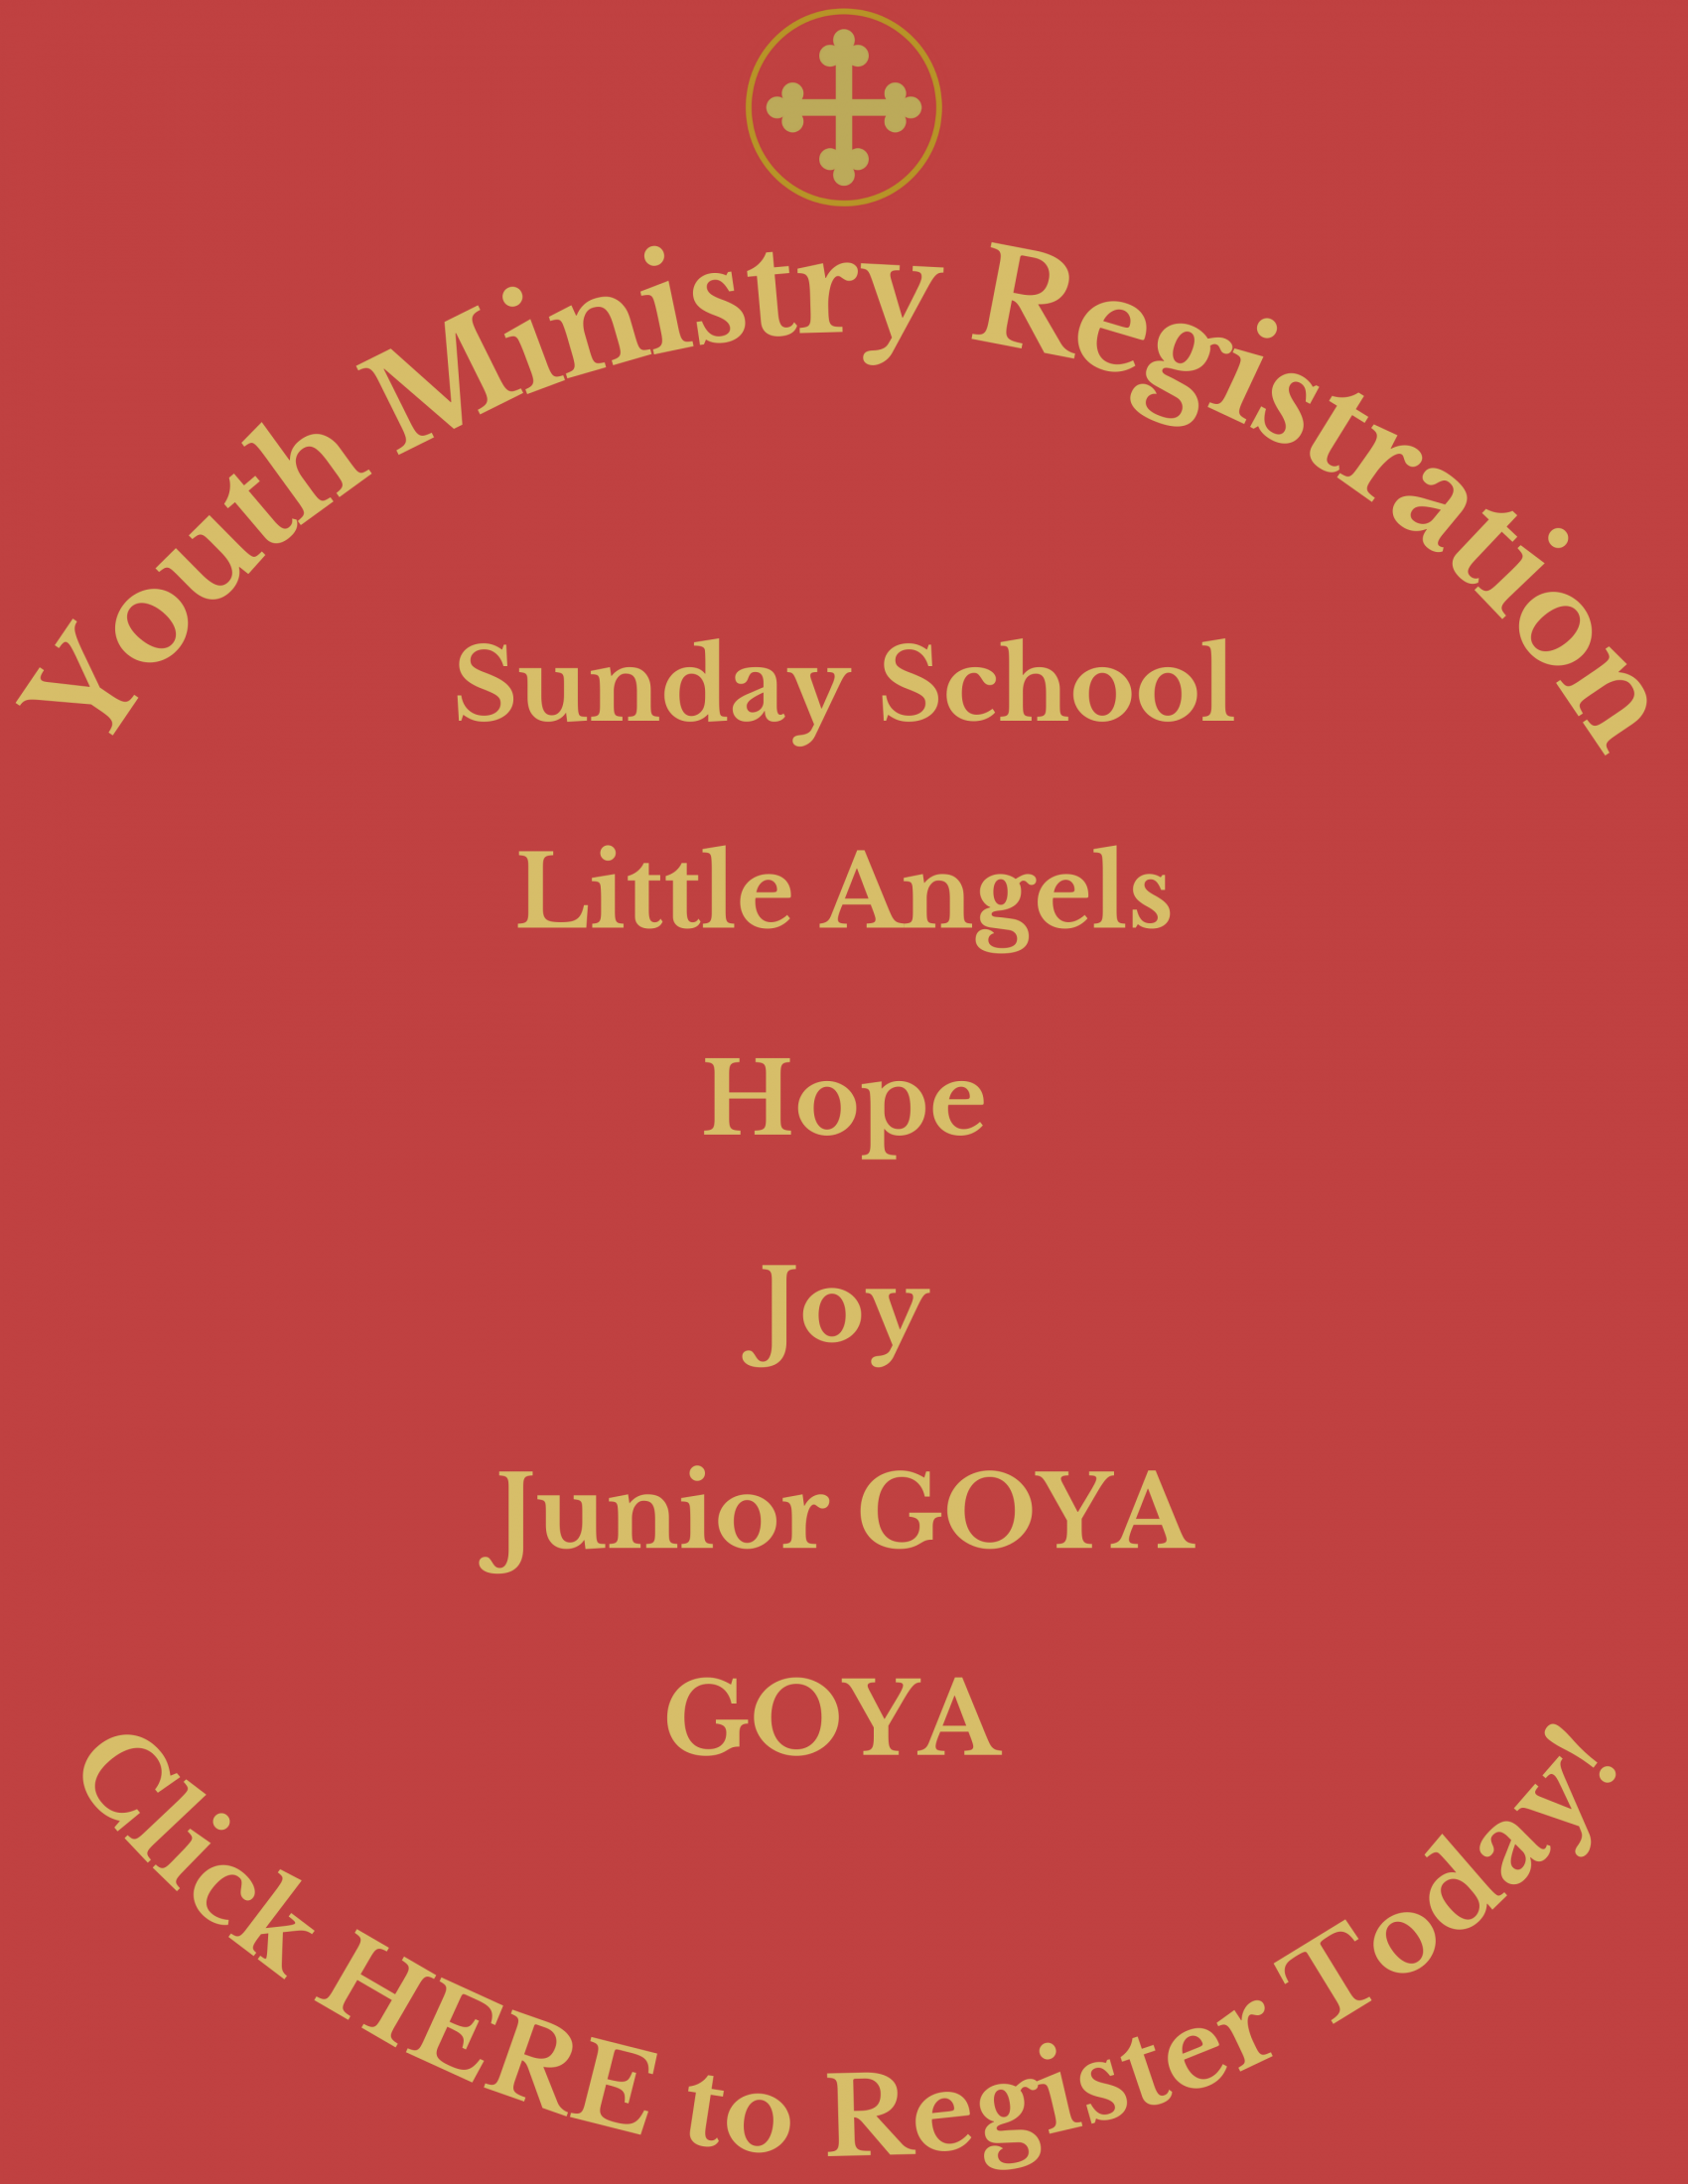 Register for our Youth Ministries